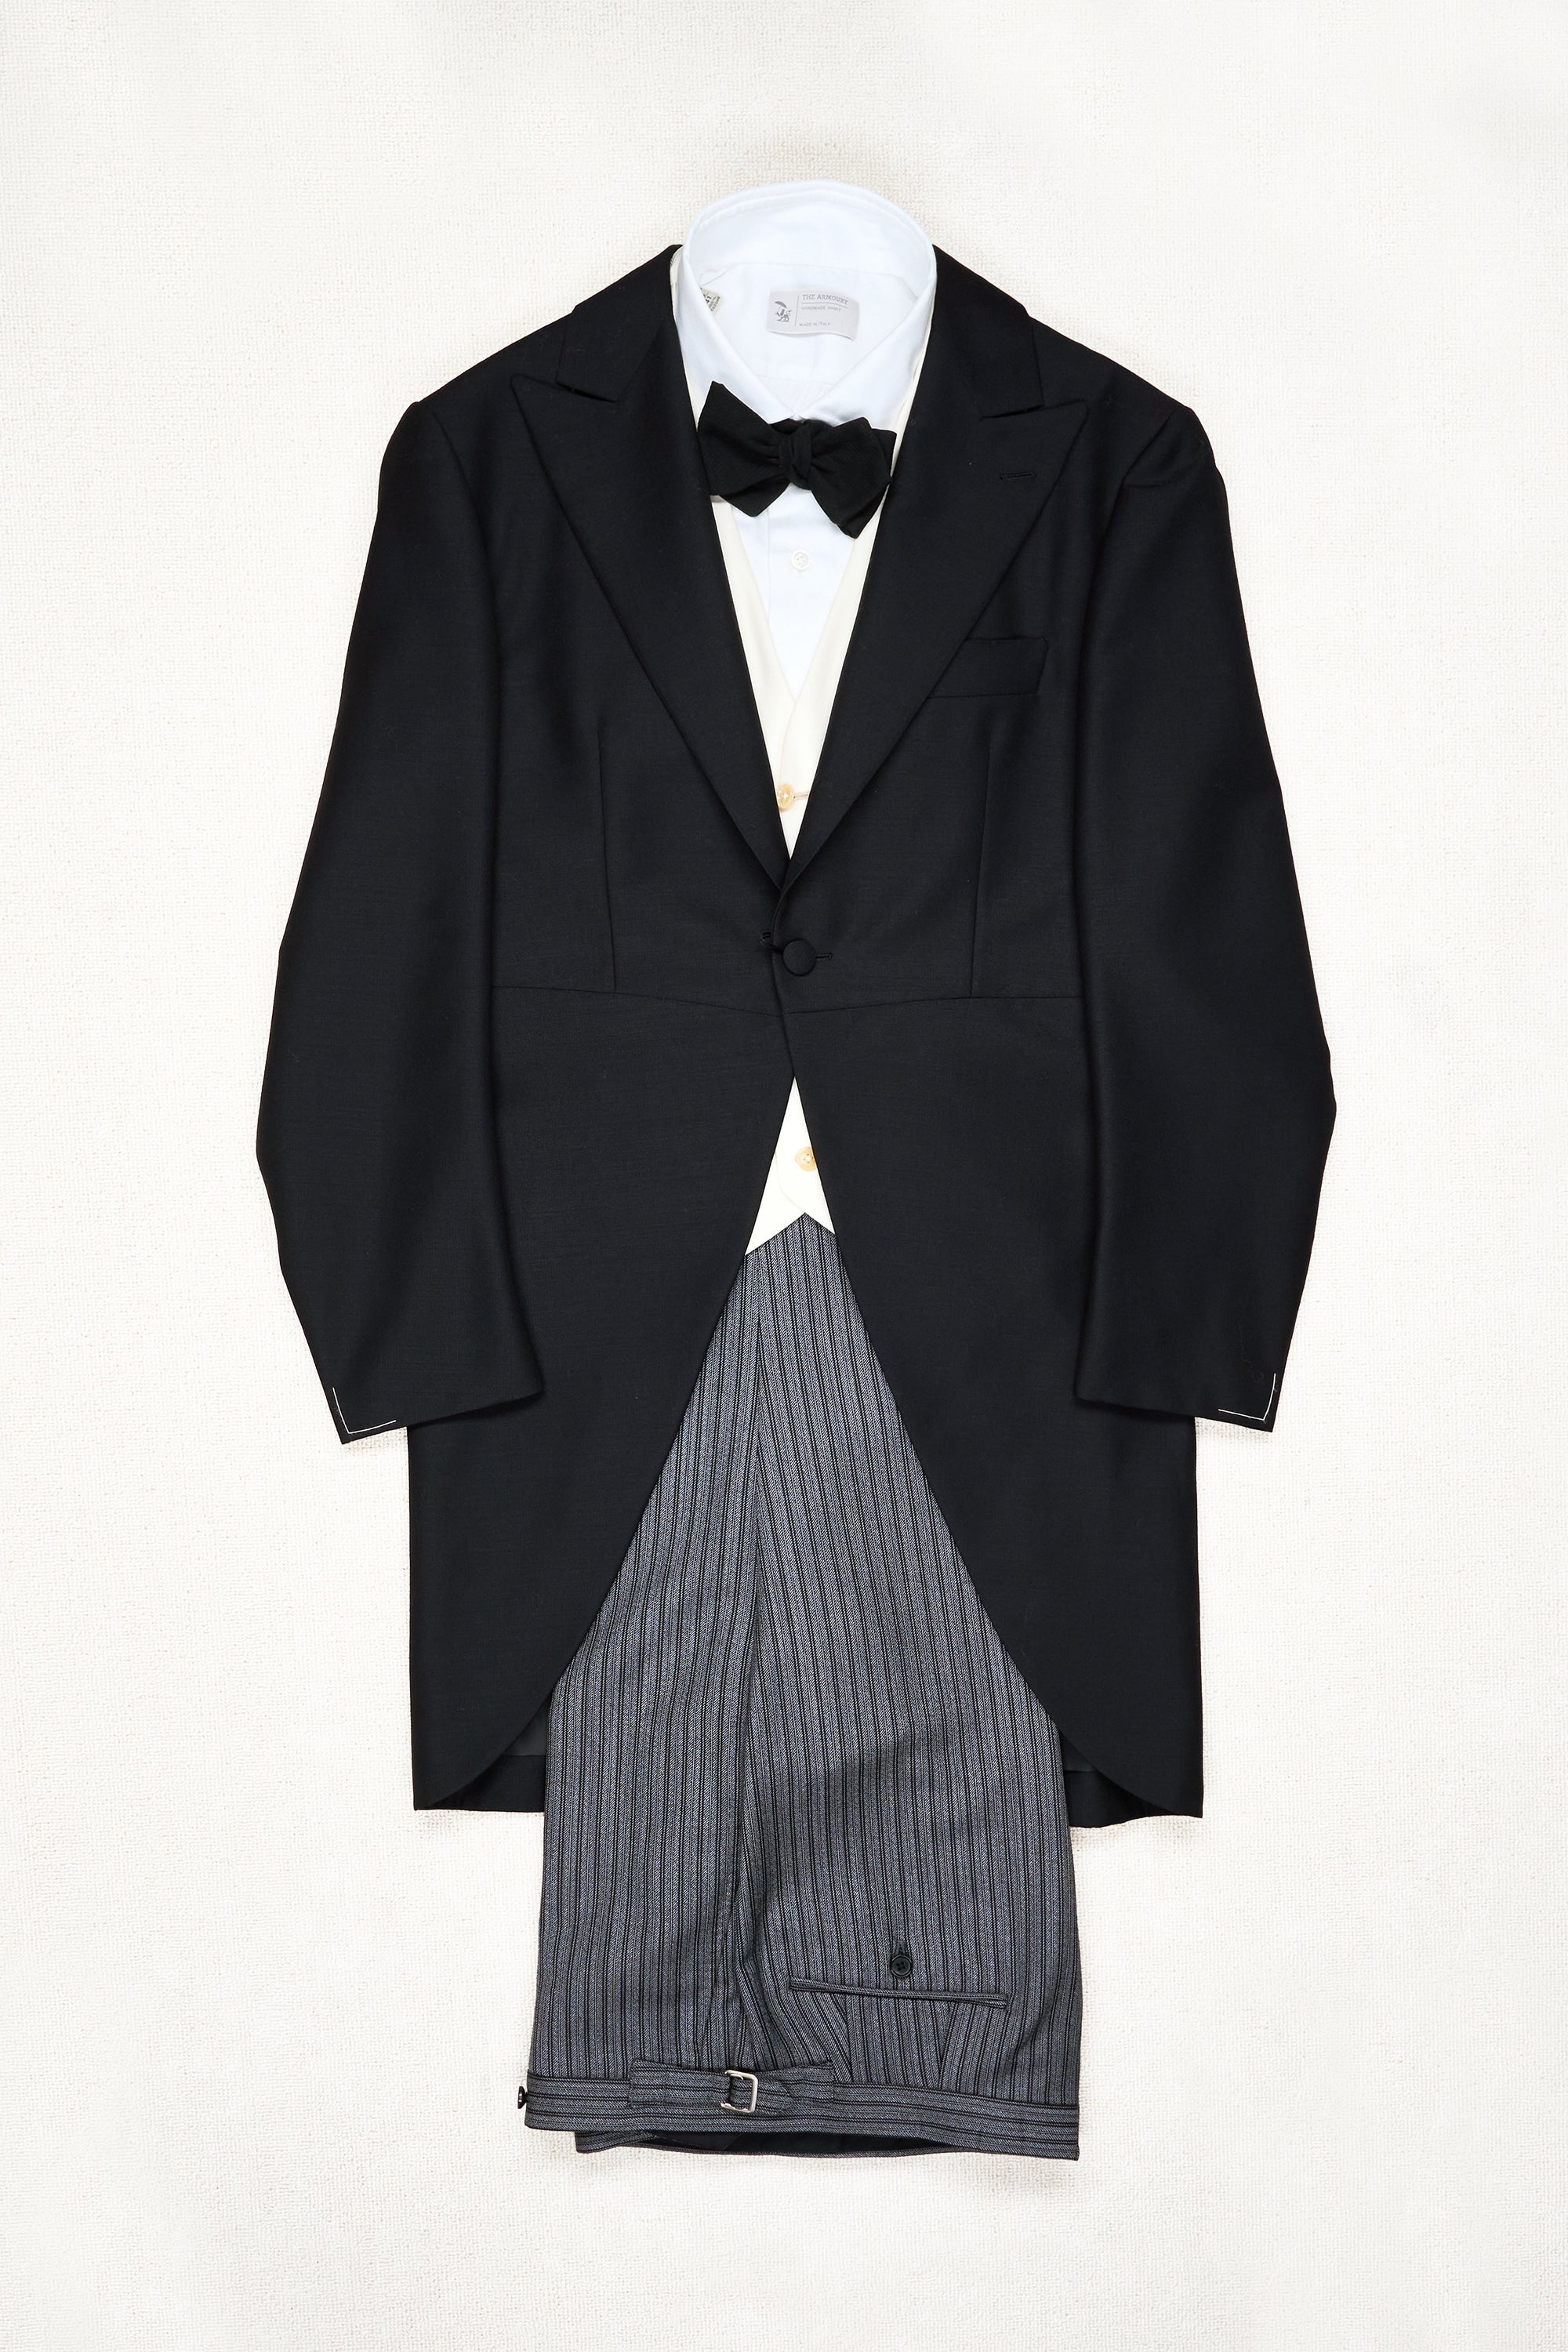 Ring Jacket Black Wool/Mohair Full Dress Tailcoat with Vest